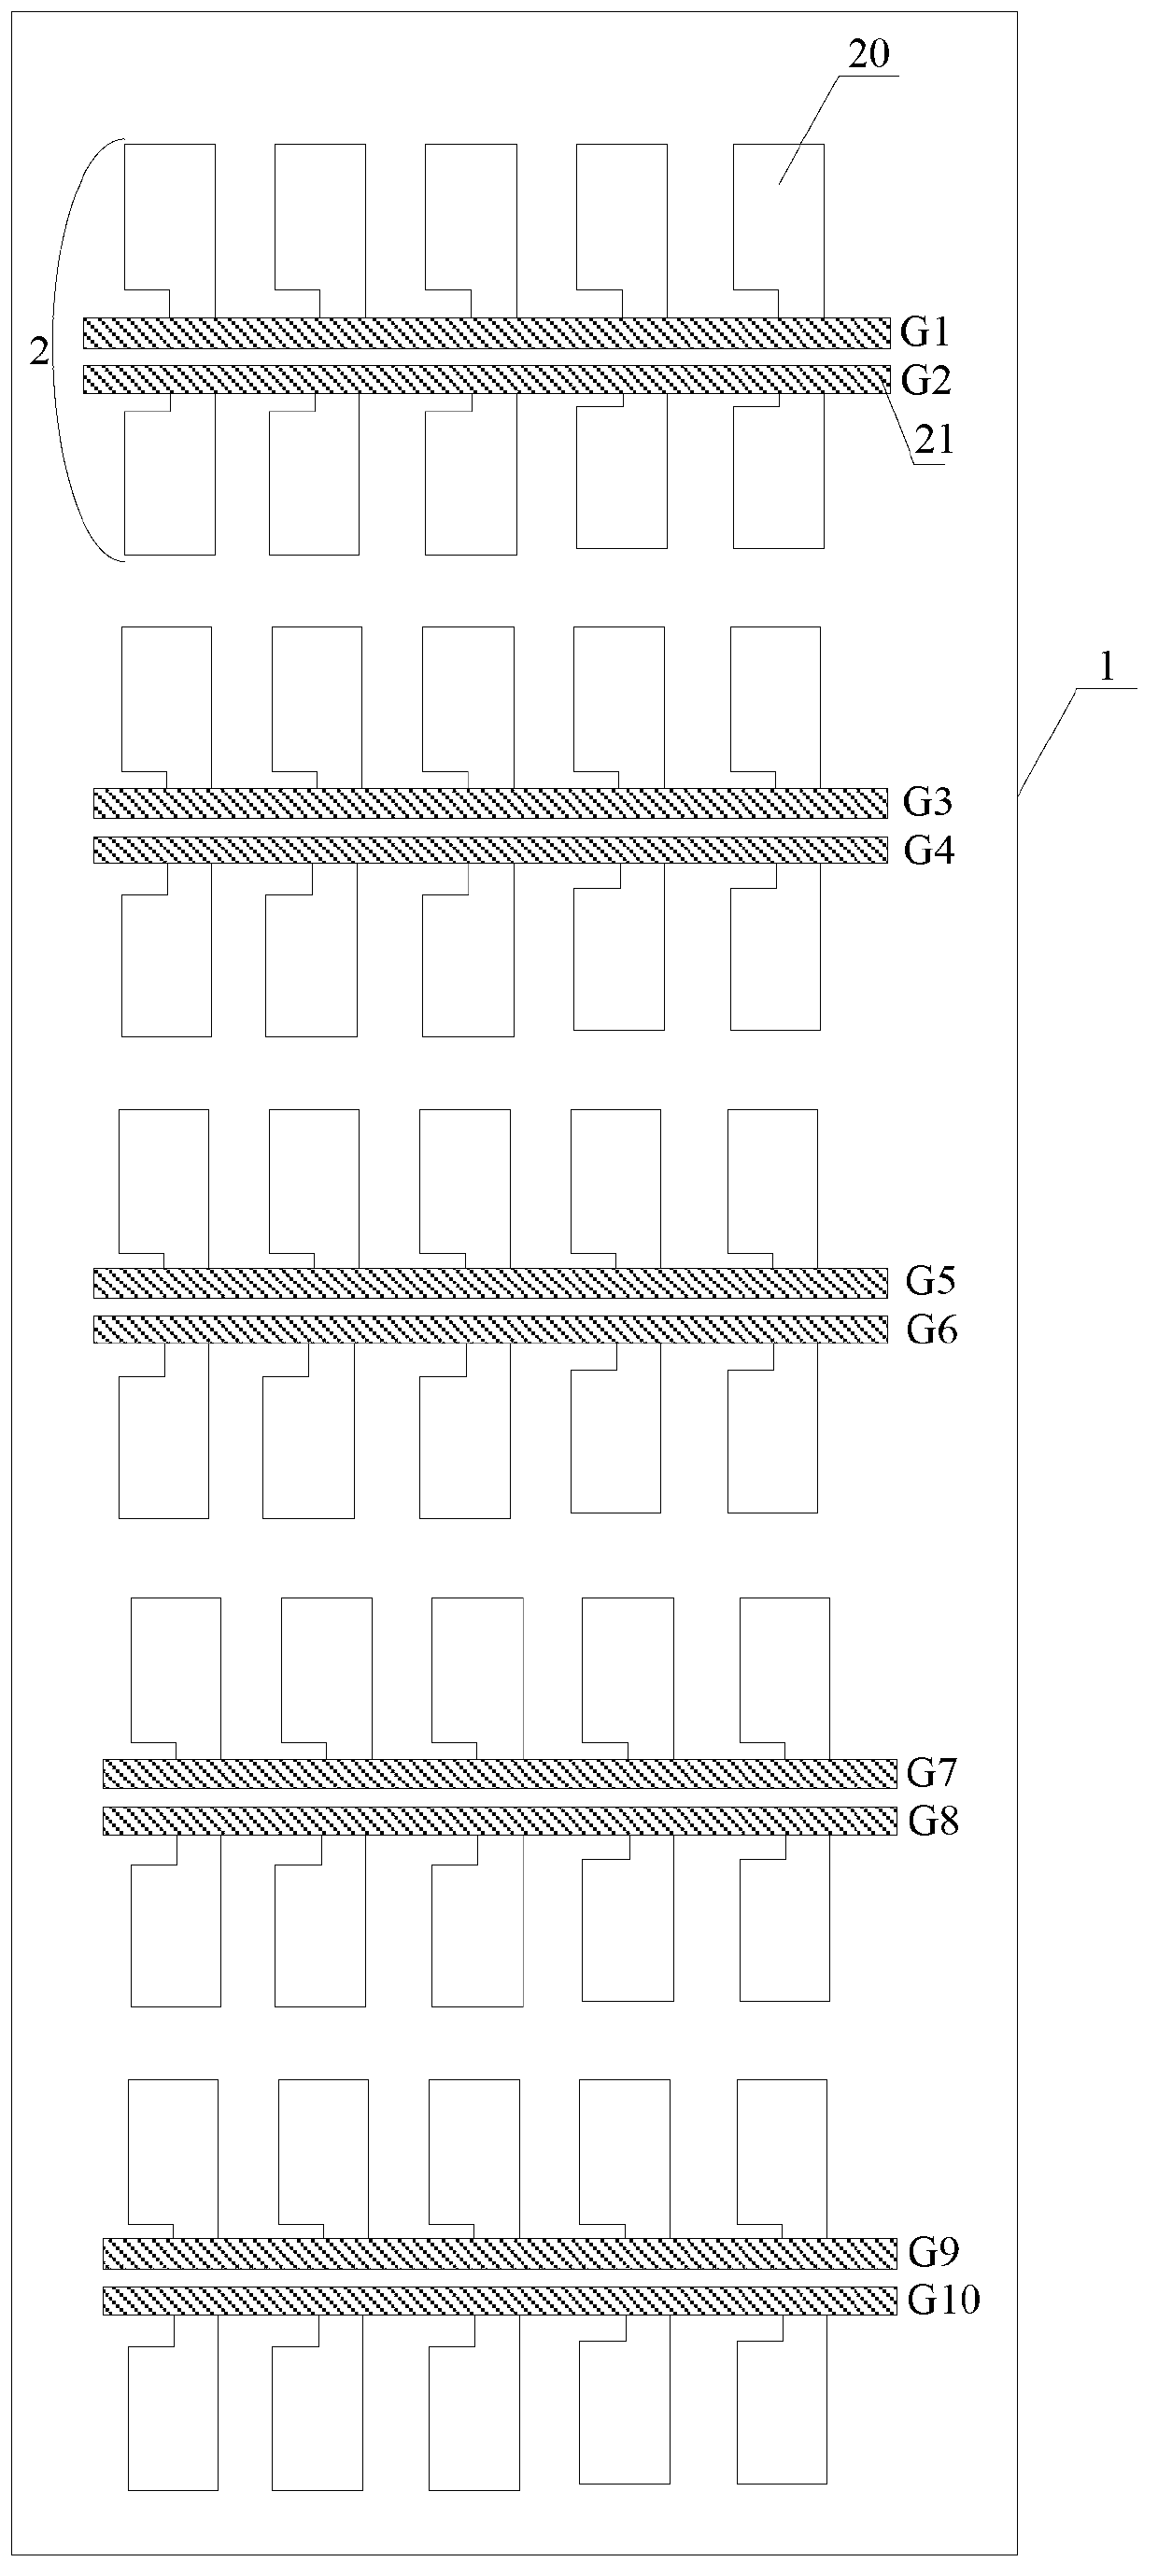 Built-in touch screen and display device